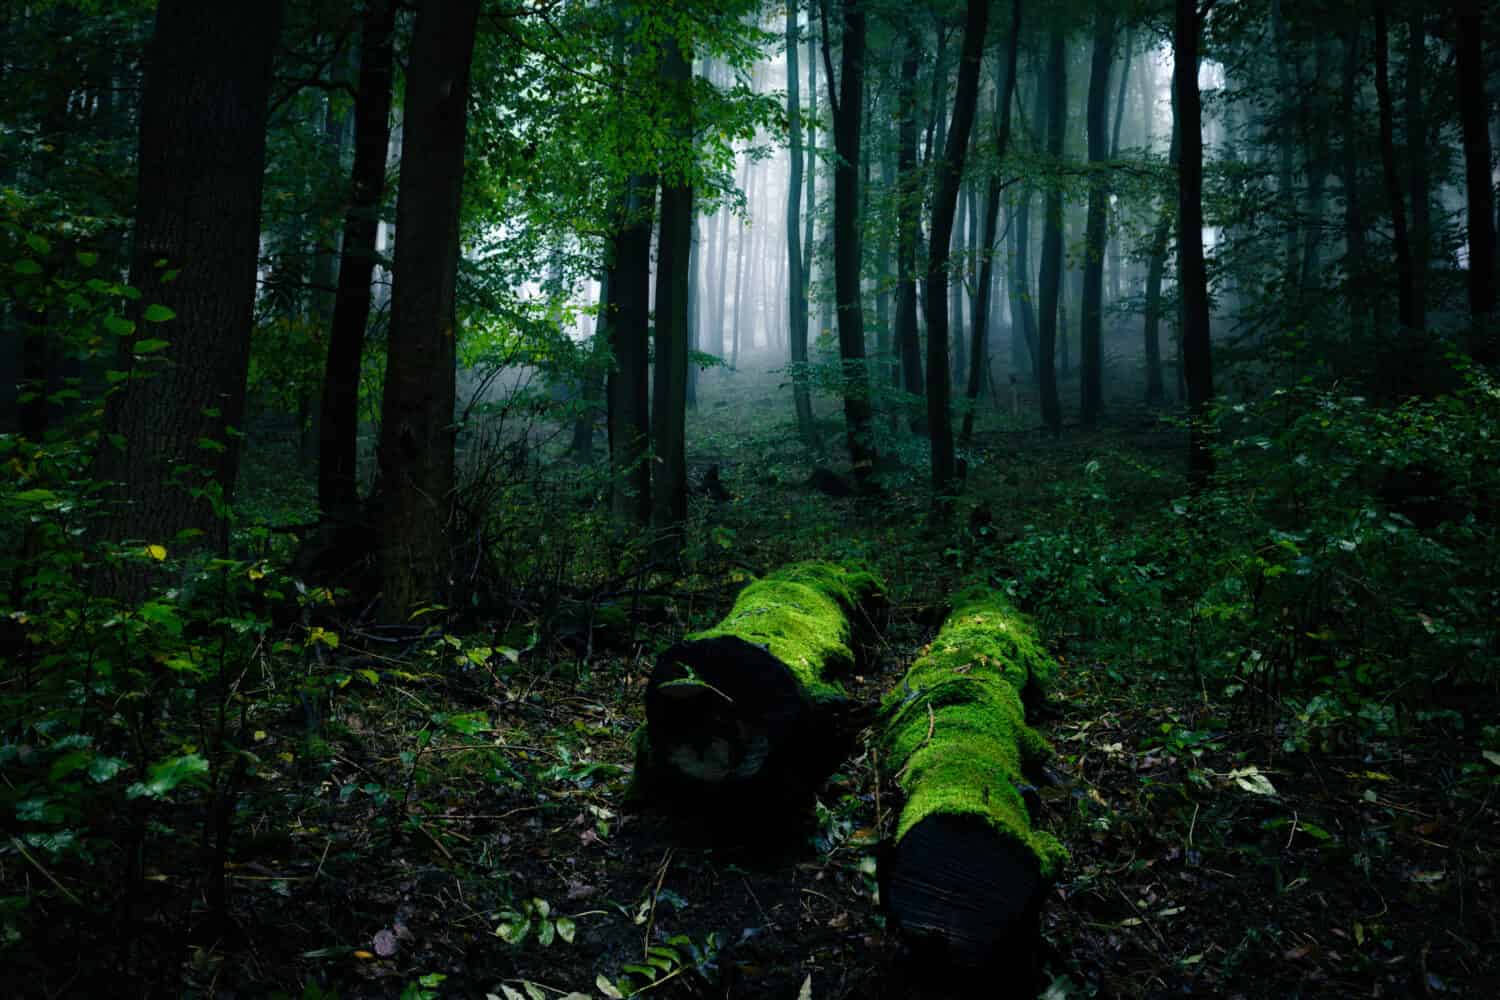 Two old tree trunks lying on the forest floor in fog